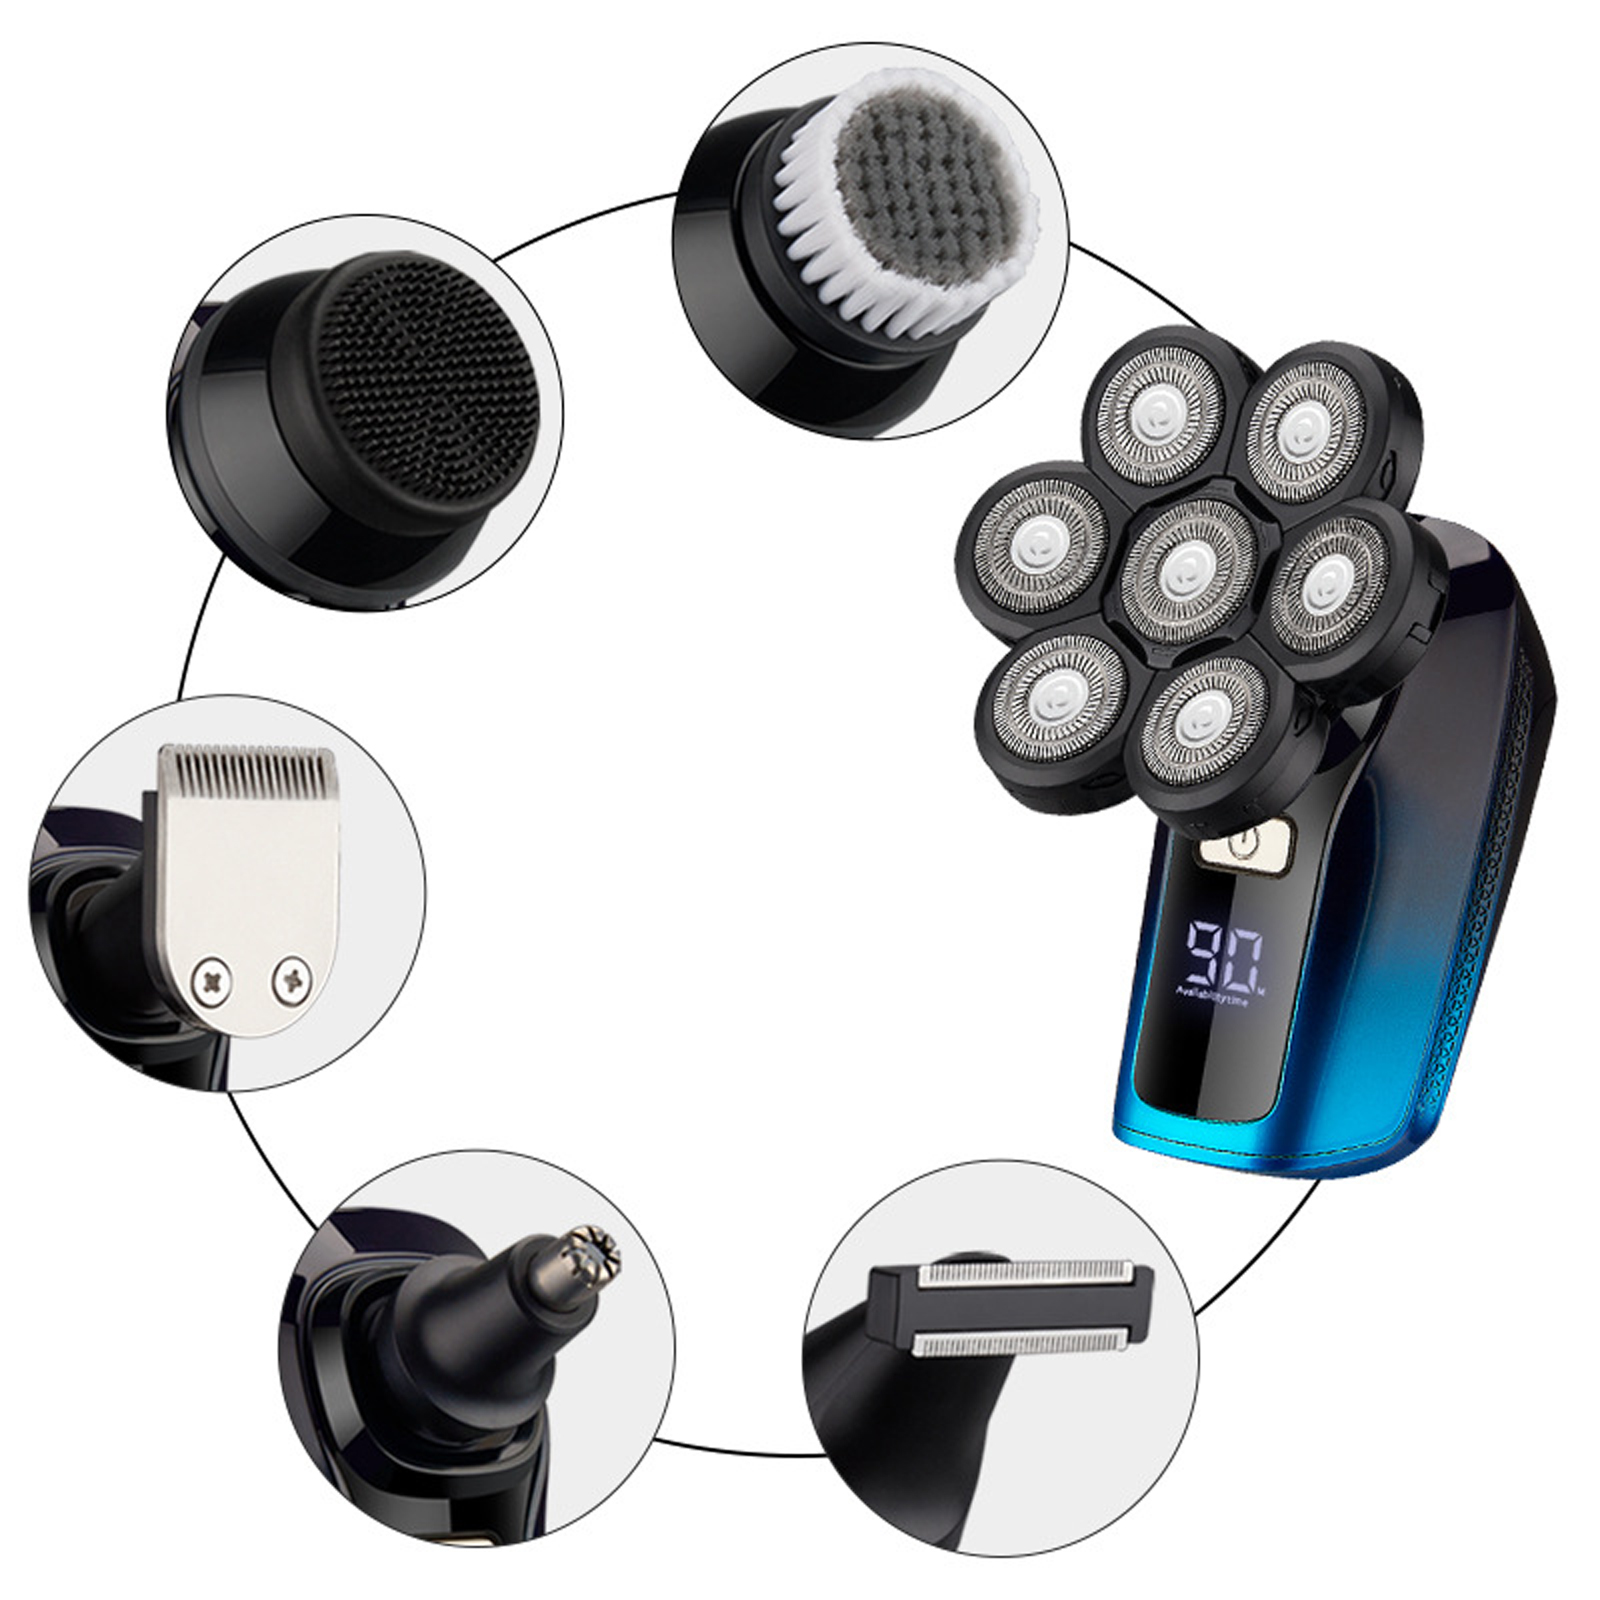 7D Shaver Body Washable Digital Display Usb Rechargeable Electric Shavers Nose Hair Haircut for Bald